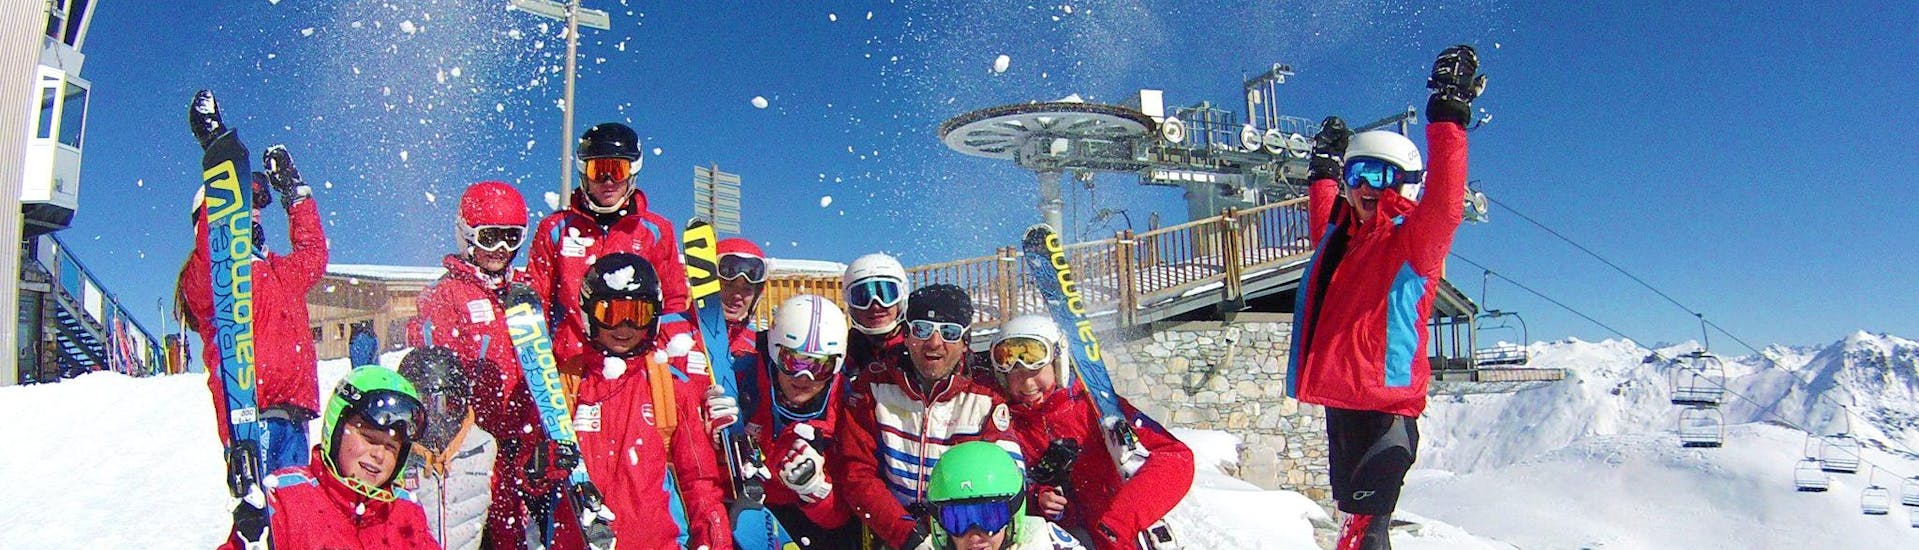 skiing-lessons-for-teens-13-18-years-morning-holidays-esf-la-plagne-hero